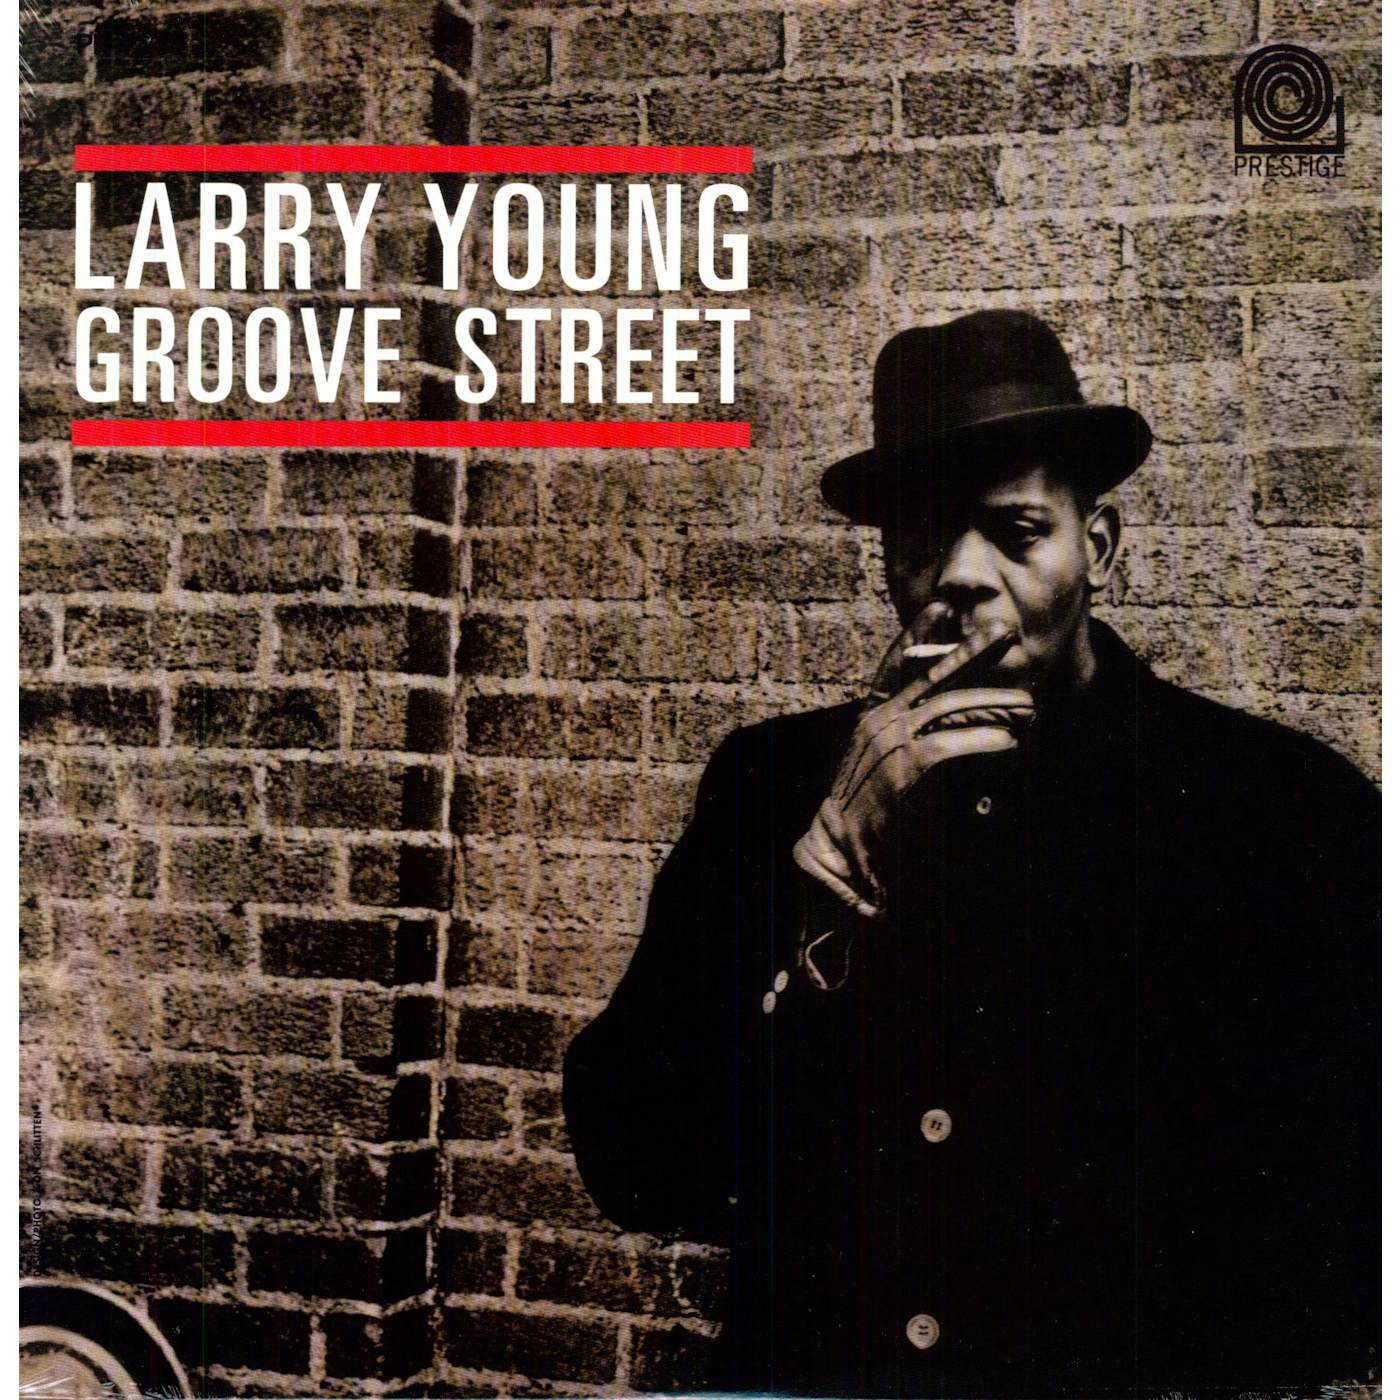 Larry Young Groove Street Vinyl Record